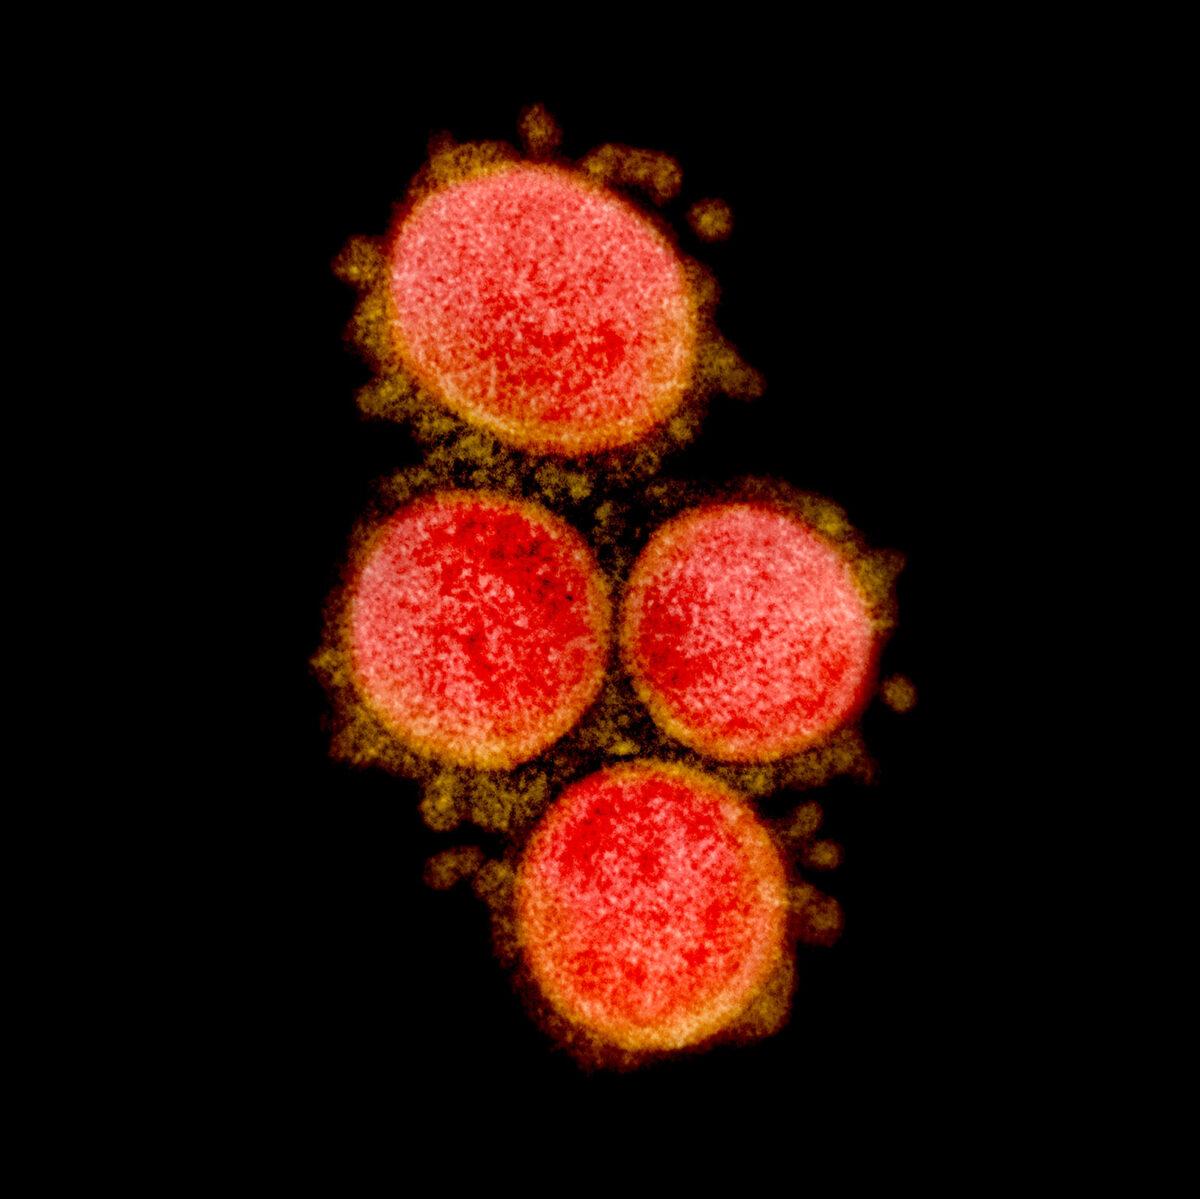 Transmission electron micrograph of the CCP virus, commonly known as novel coronavirus or SARS-CoV-2, isolated from a patient. Photo published March 10, 2020. (NIAID)